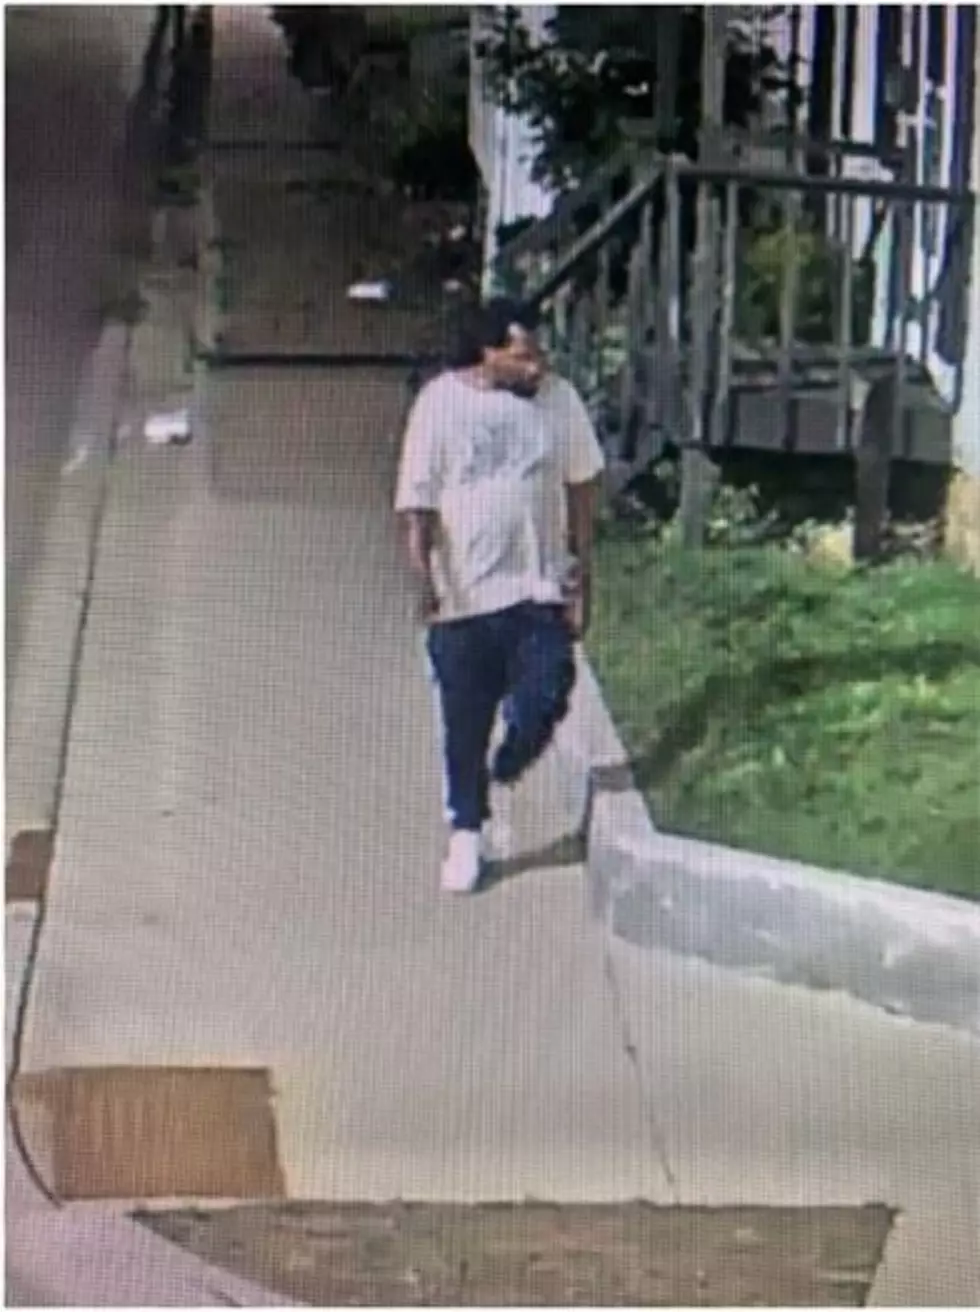 Dubuque Police Seek Assistance in Identifying Suspect